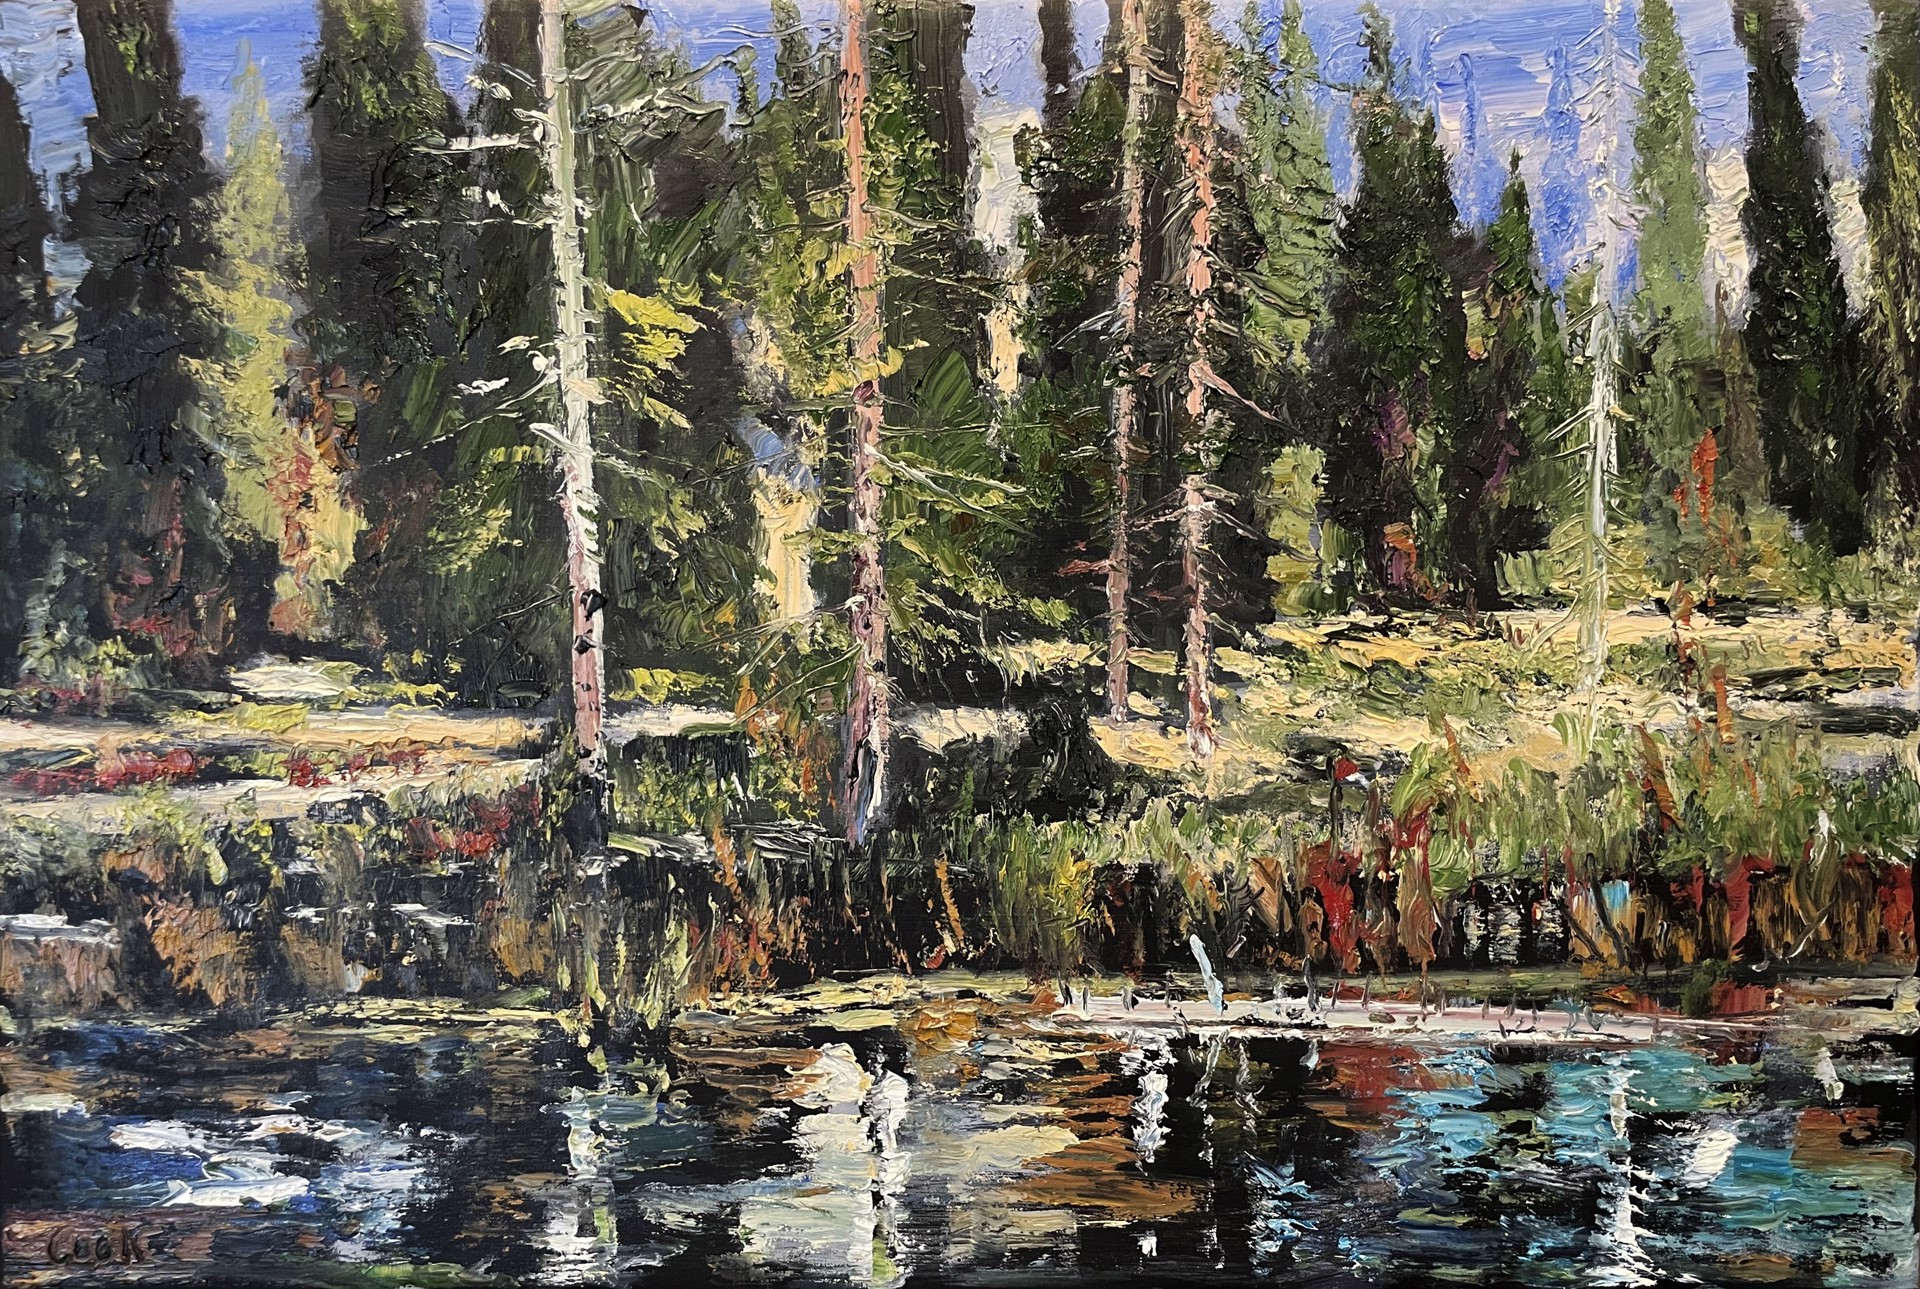 Beaver Pond Study - Autumn #4 by James Cook